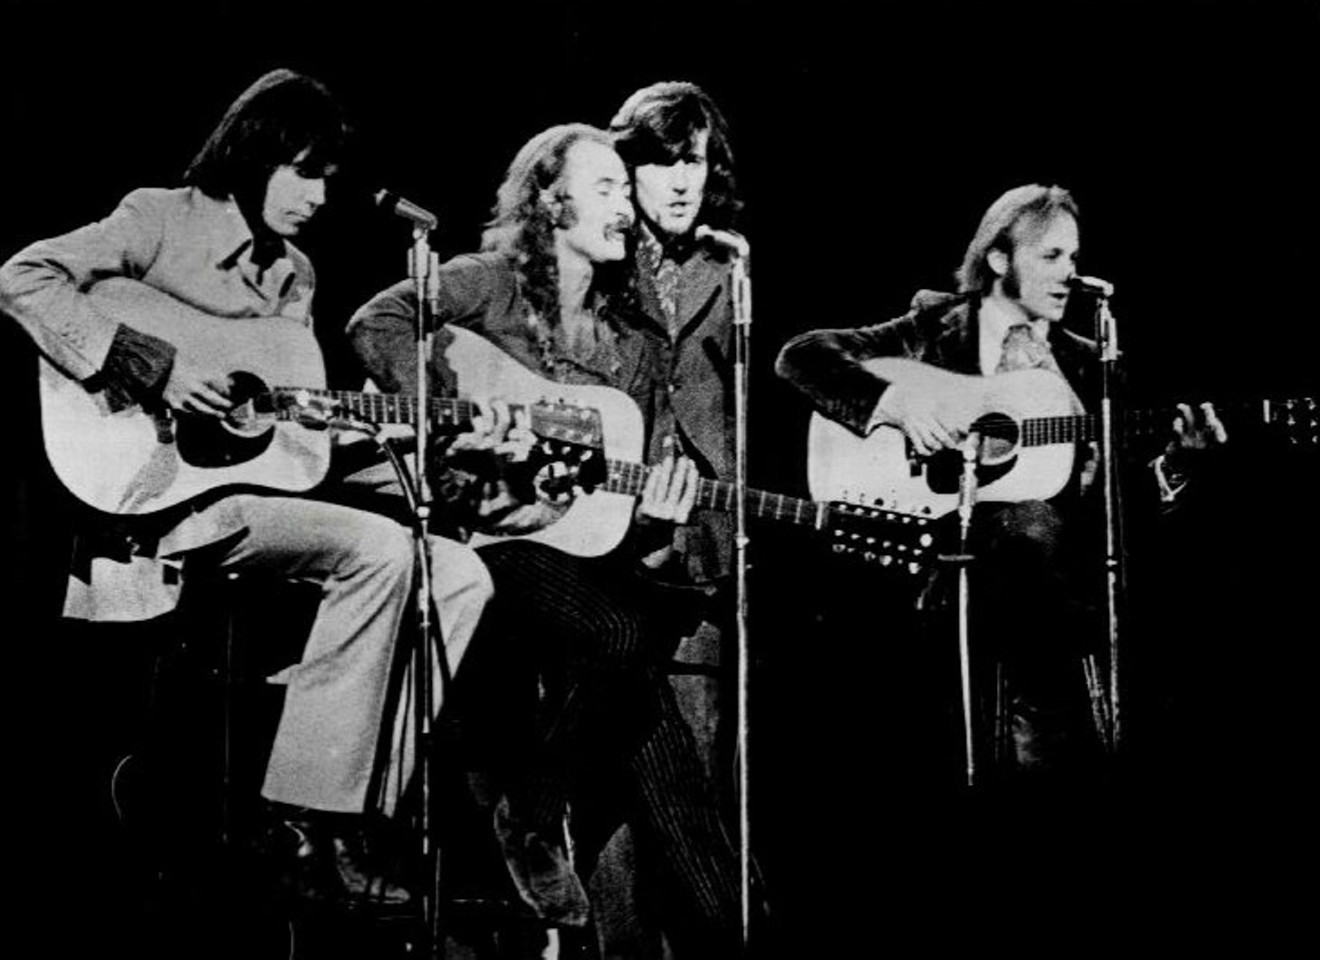 Neil Young, David Crosby, Graham Nash, and Stephen Stills on tour in 1970.